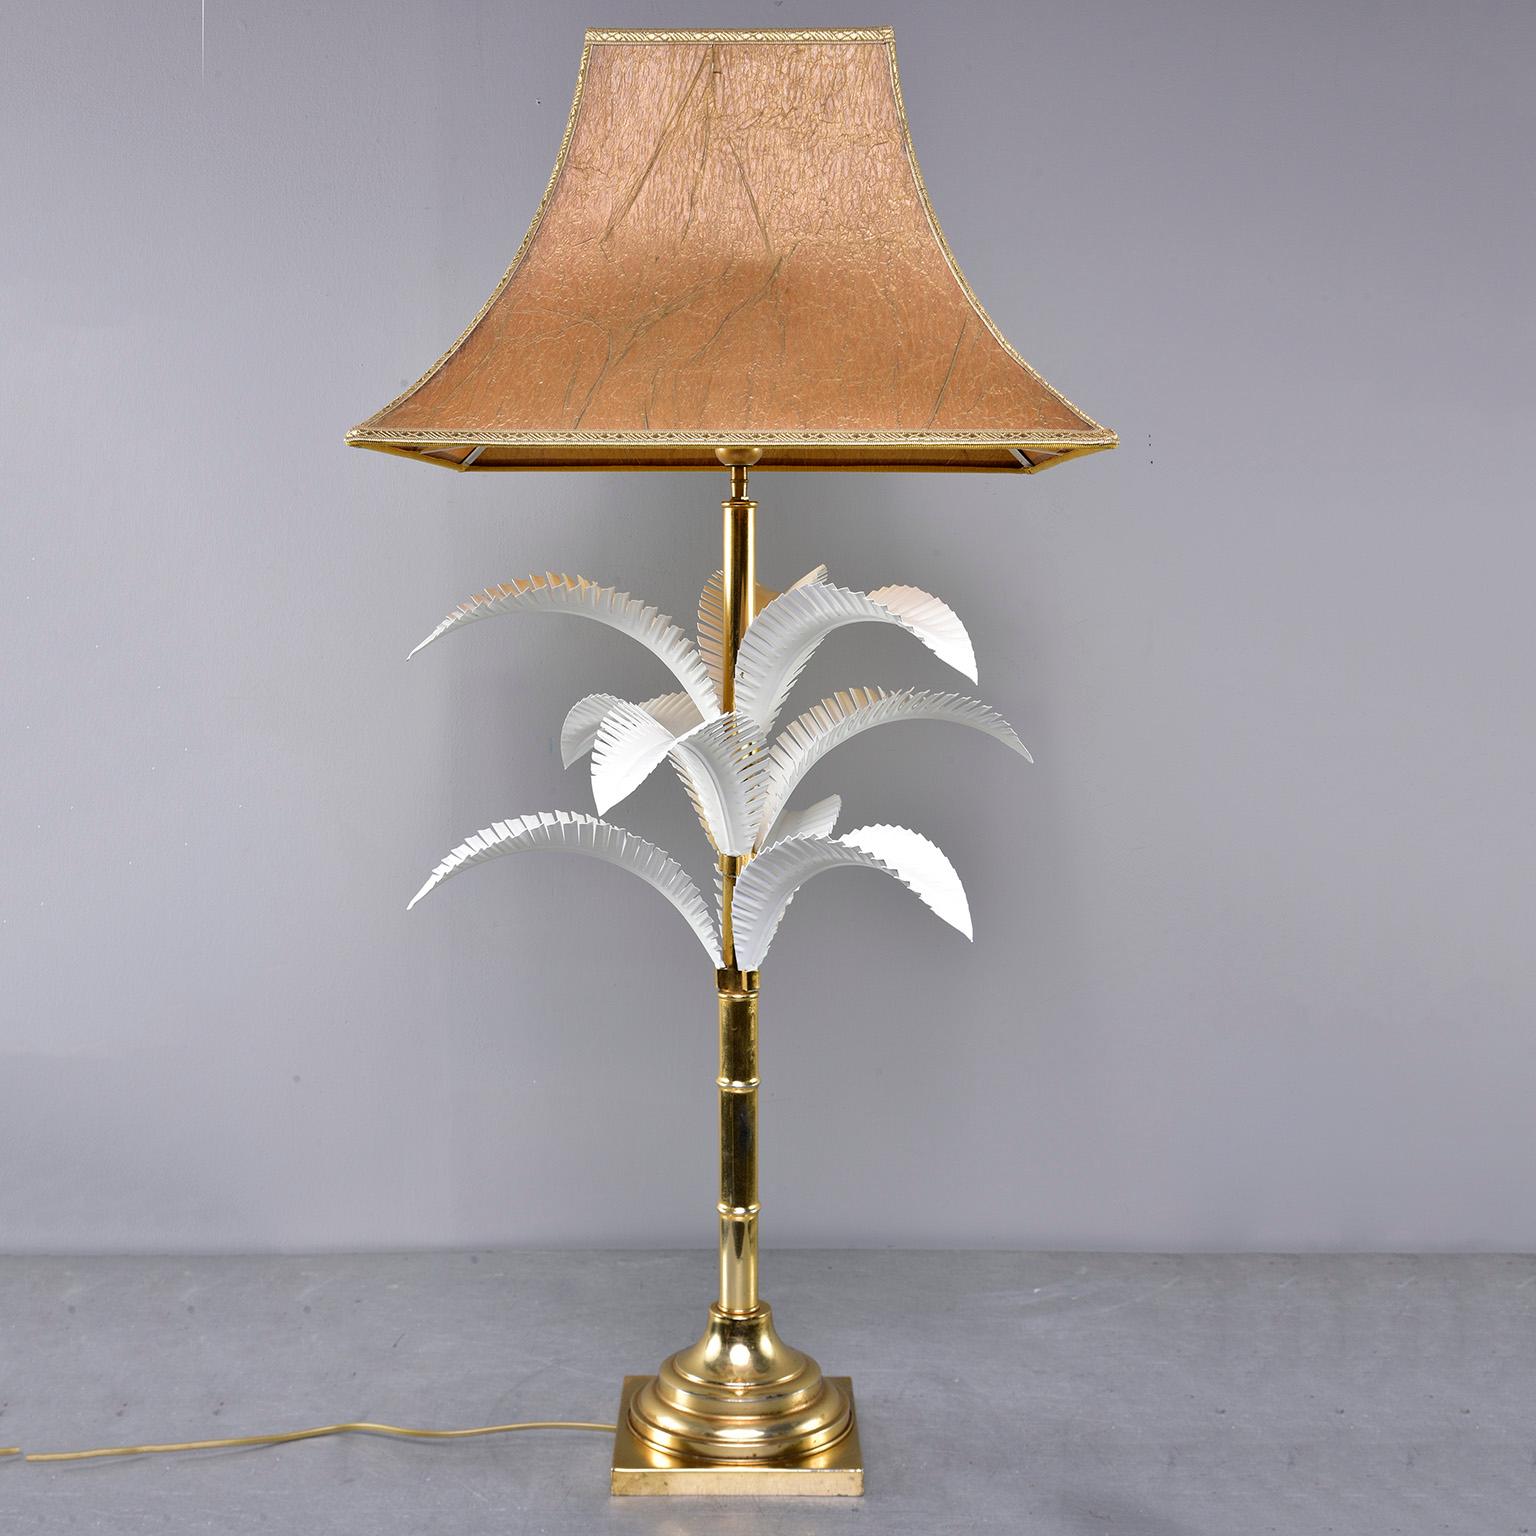 Table lamp by unknown maker was found in Italy, circa 1970s. Brass base, shaft has faux bamboo details and enameled white metal palm fronds. Parchment shade, toggle switch cord. Wiring and plug updated for US electrical standards.

Measures: Shade